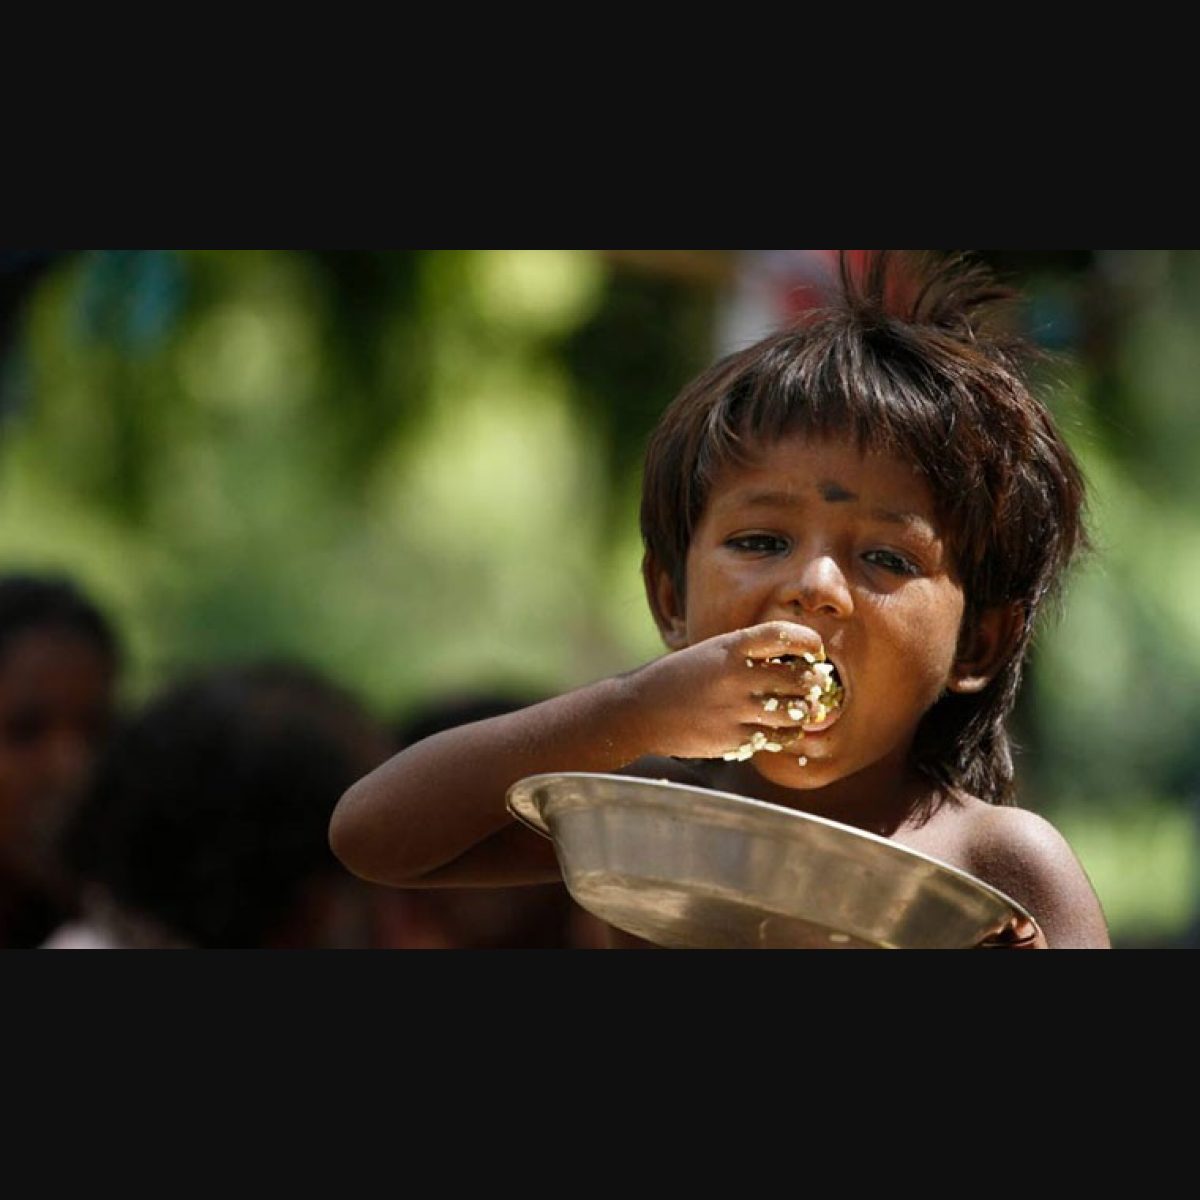 heart touching pictures of poor people